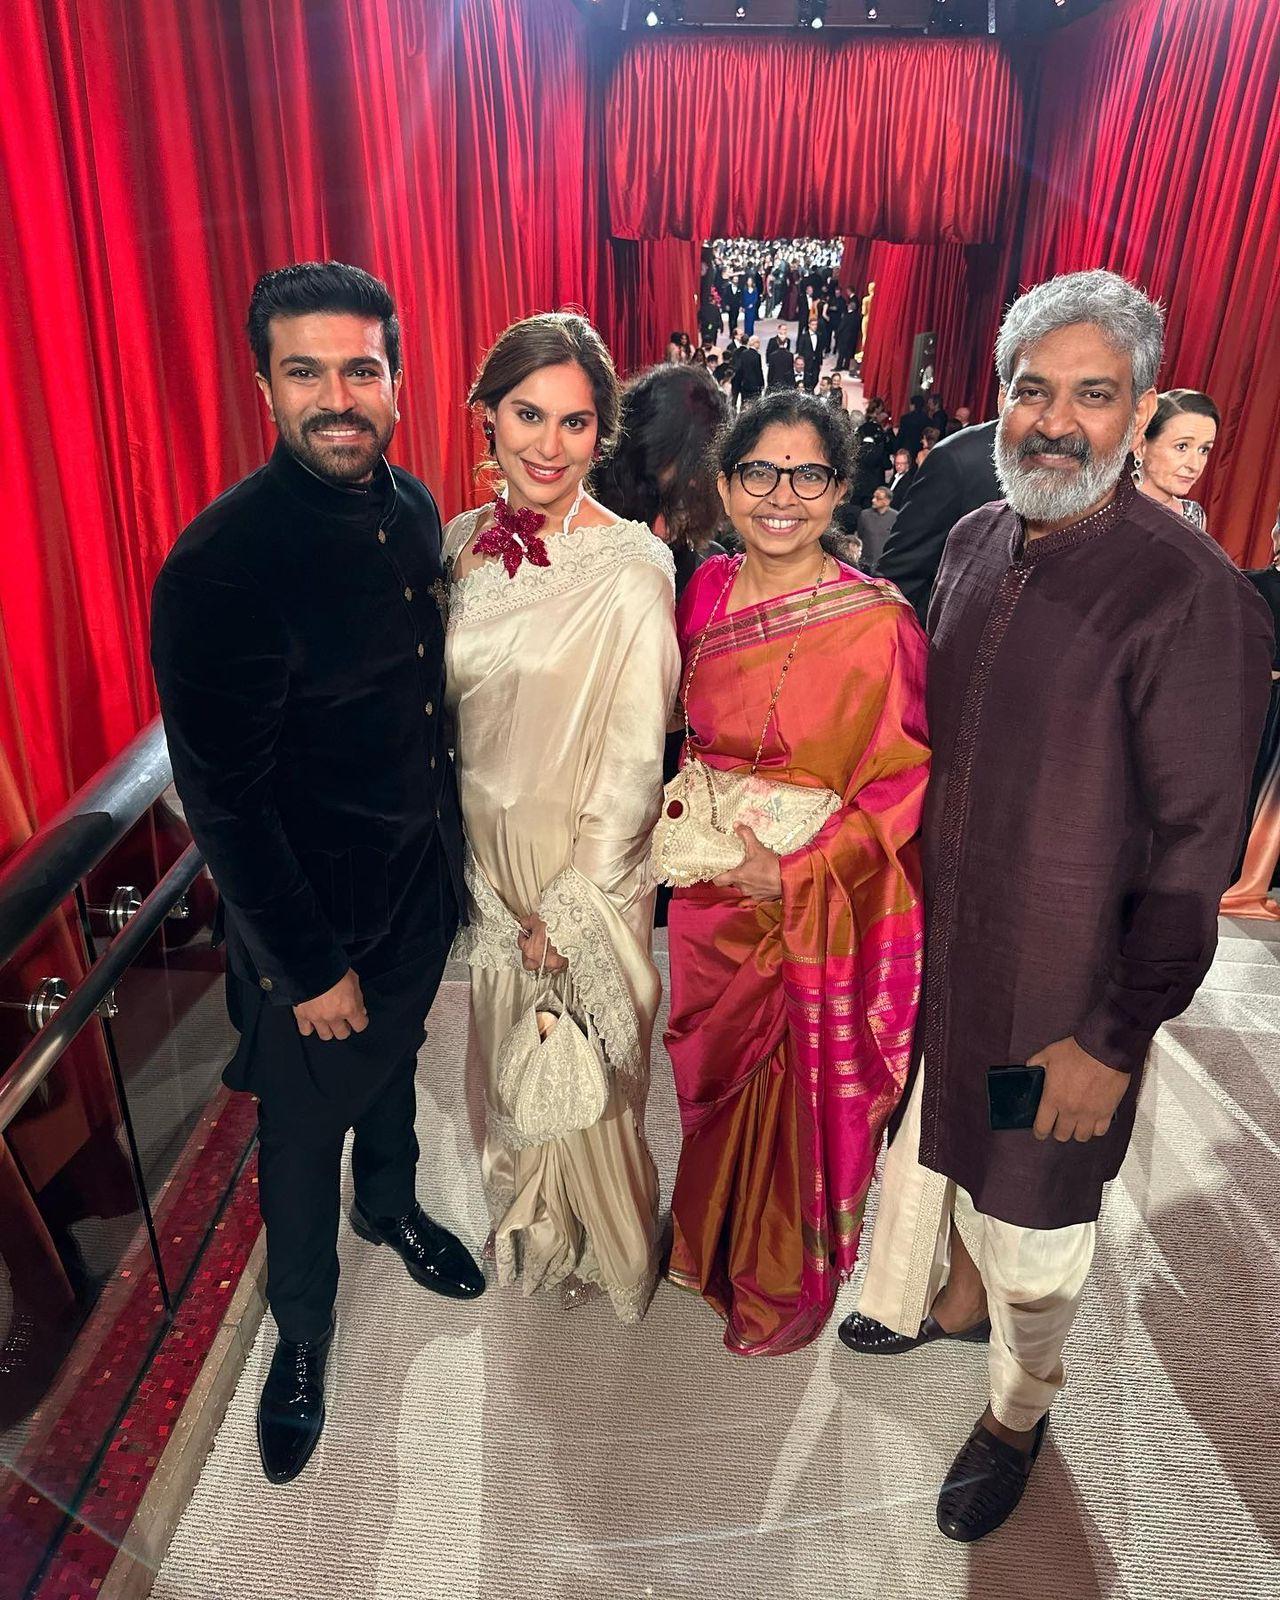 RRR director SS Rajamouli and actor Ram Charan pose with their respective spouses